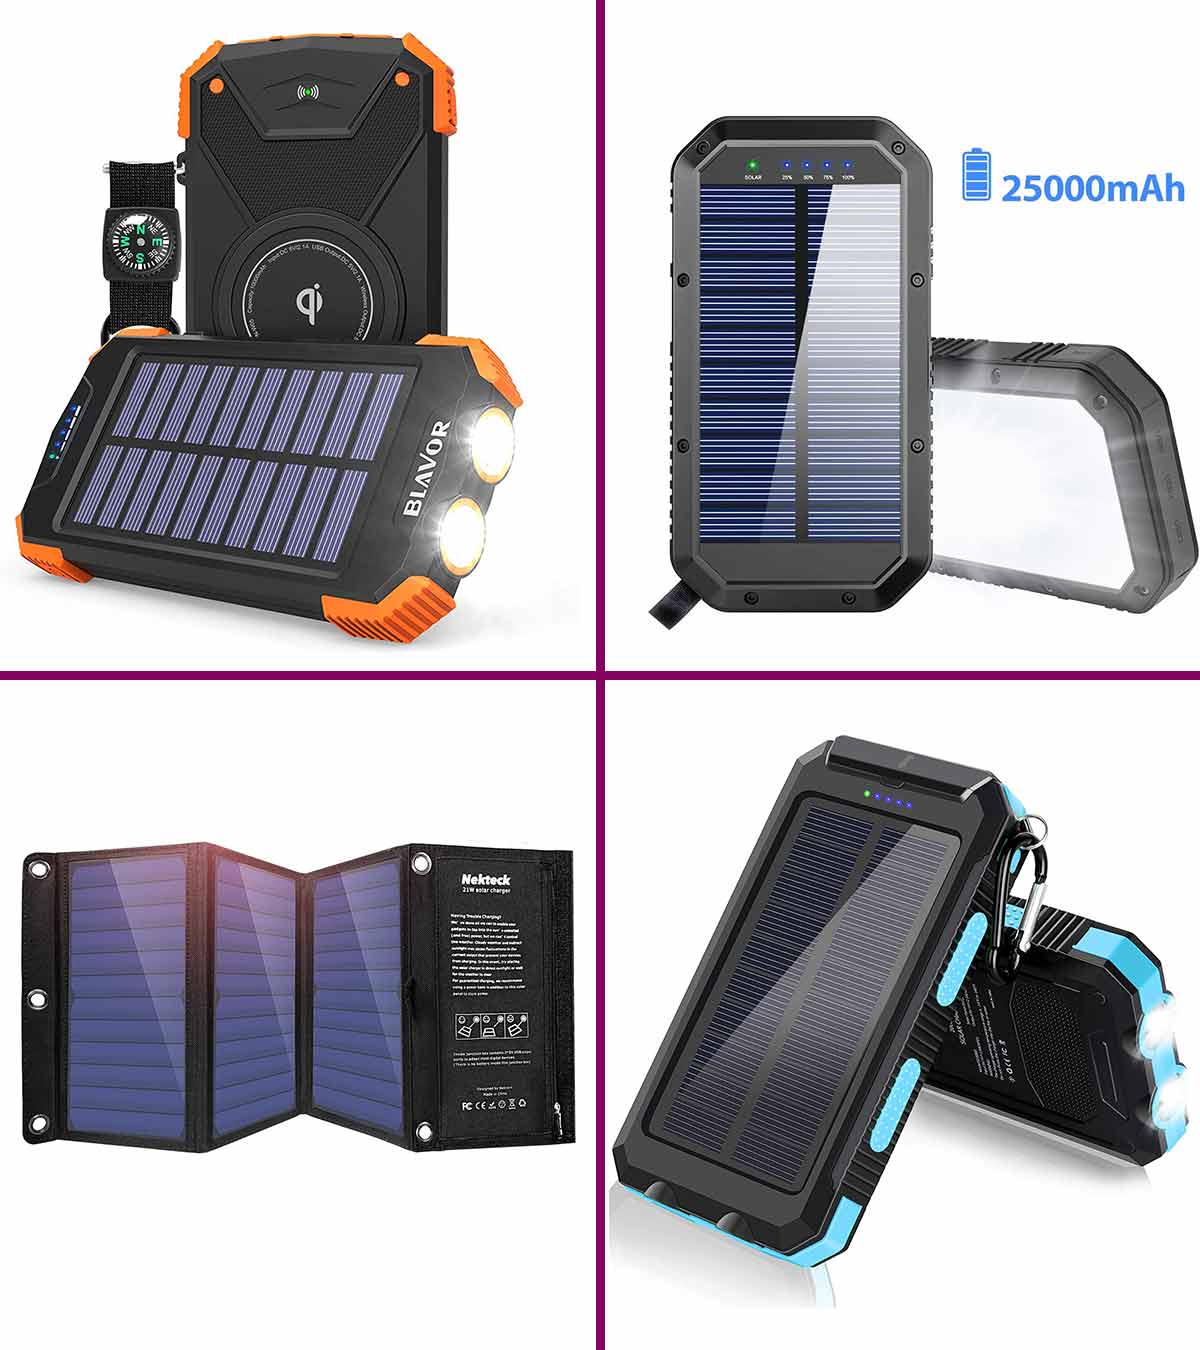 Solar Power Bank,Portable 24000mAh Solar Chargers High Capacity Solar Panel Cellphone Chargers Waterproof/Shockproof/Dustproof Solar External Battery Dual USB Backup with Strong LED Lights for IPhone,Android and More USB Devices